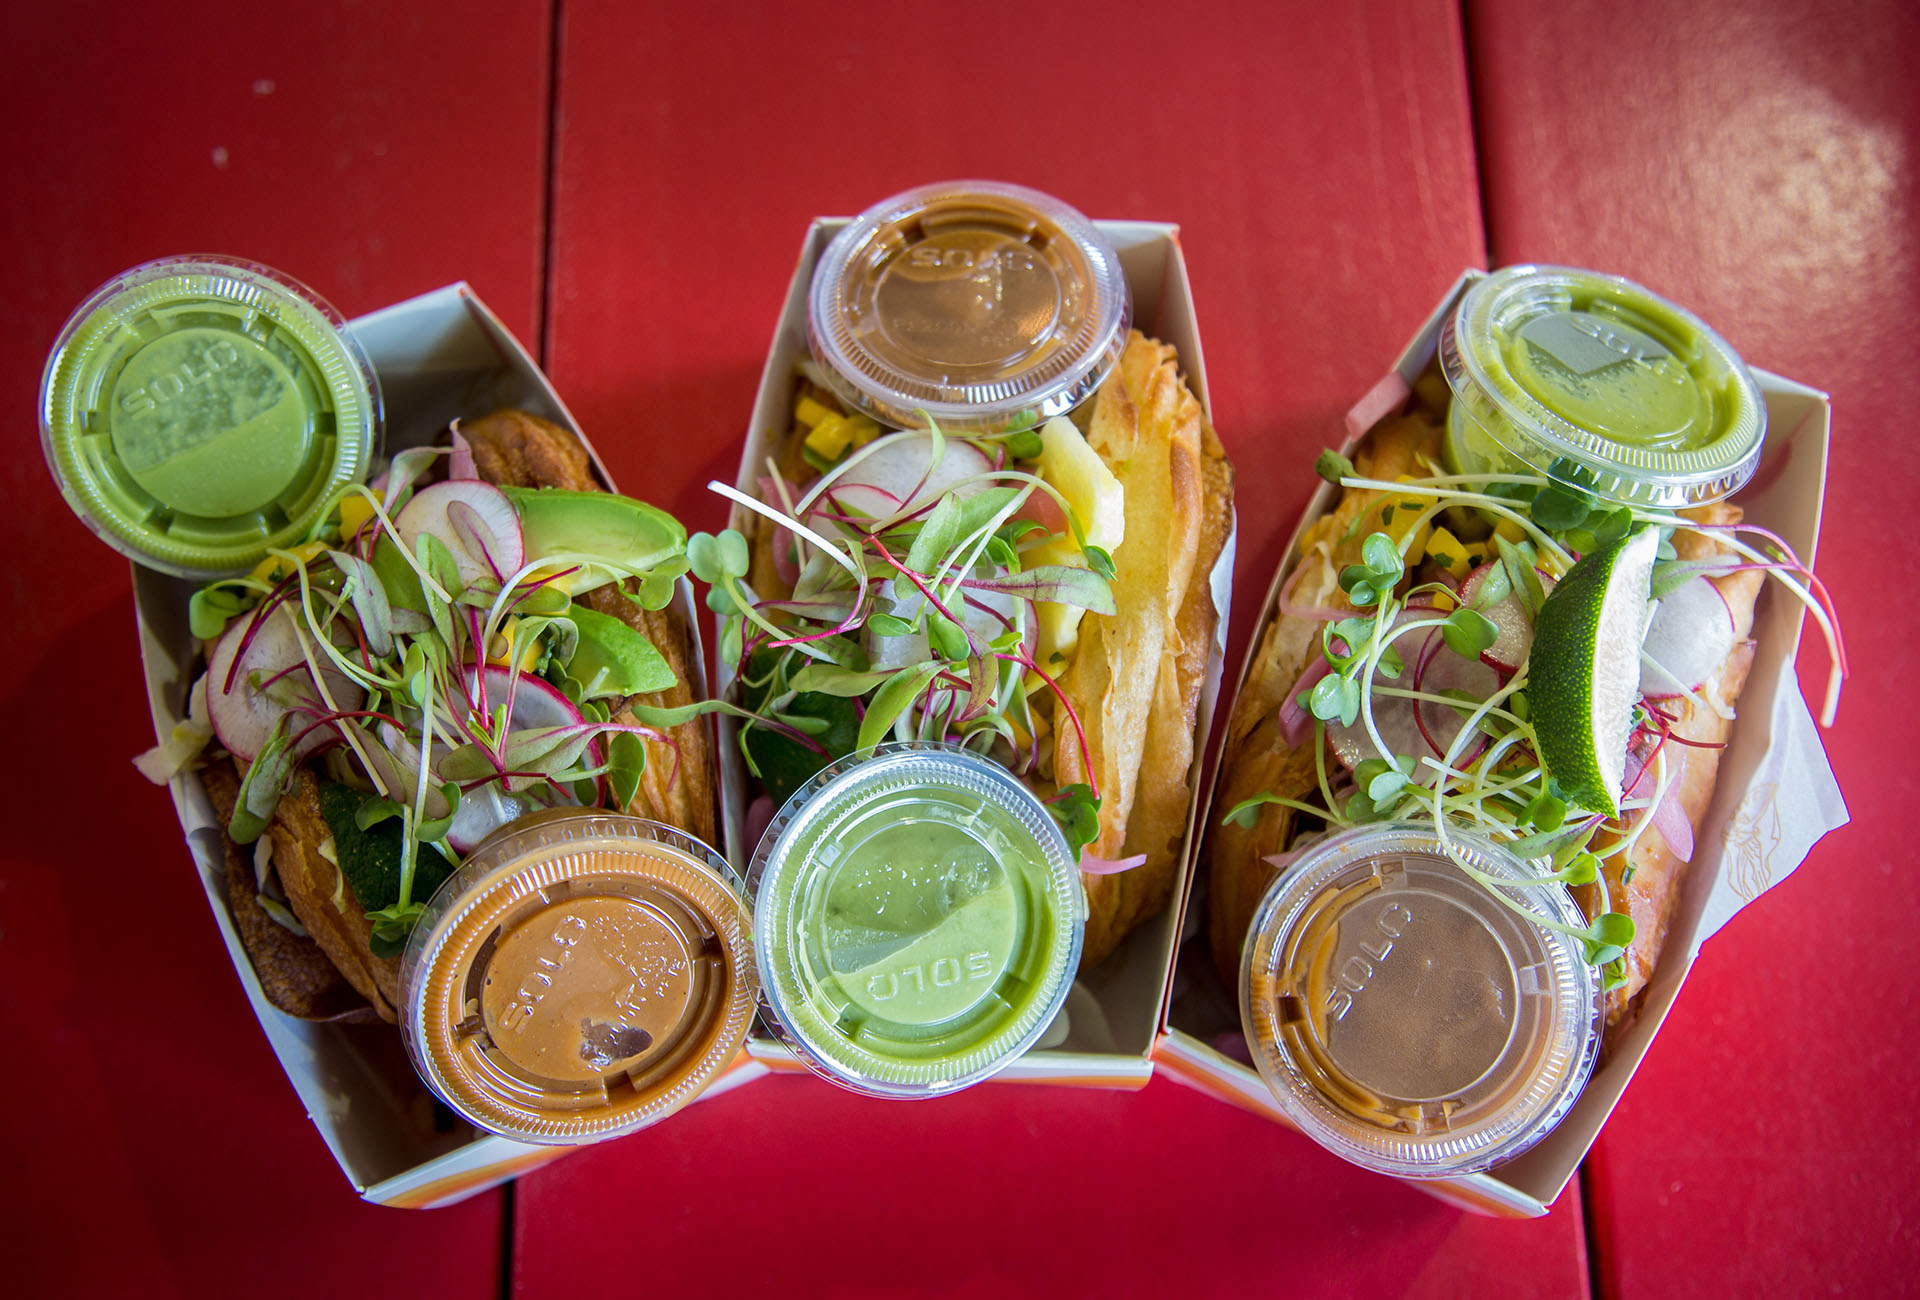 All three varieties of the Tacro including the Jackfruit BBQ, Chicken and Avocado, and Pulled Pork and Pineapple.